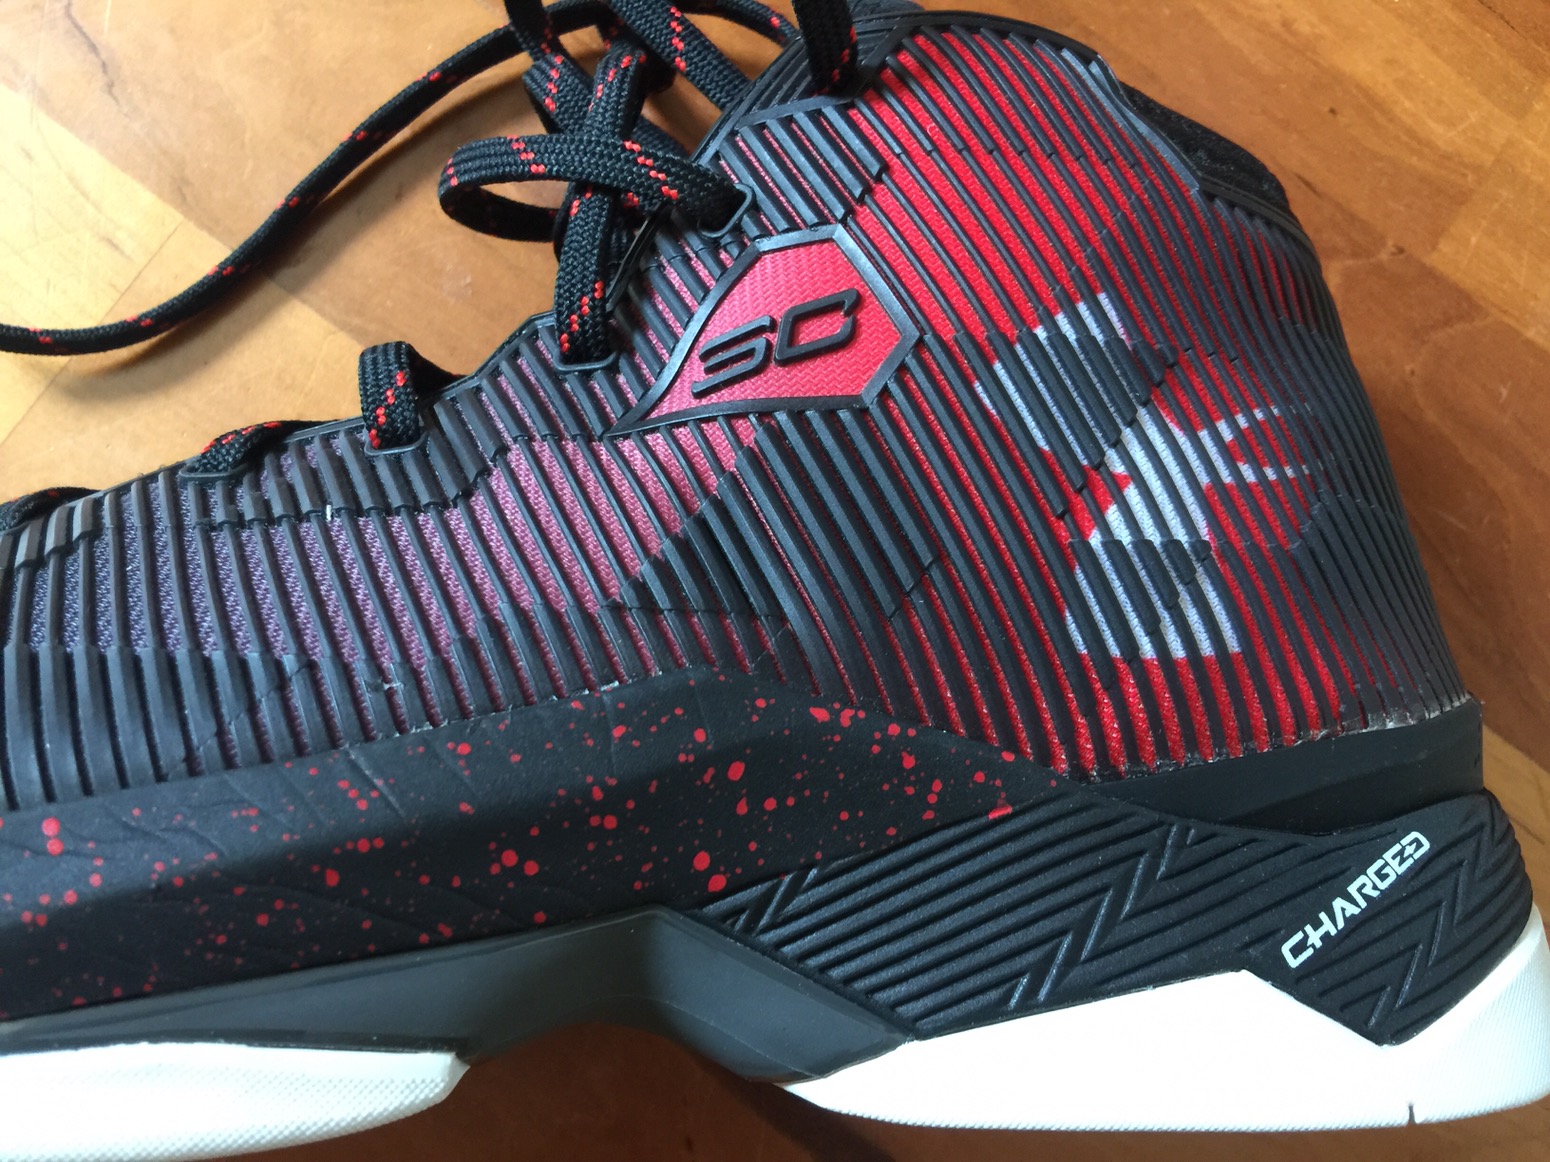 Under Armour Curry 2.5 Performance 